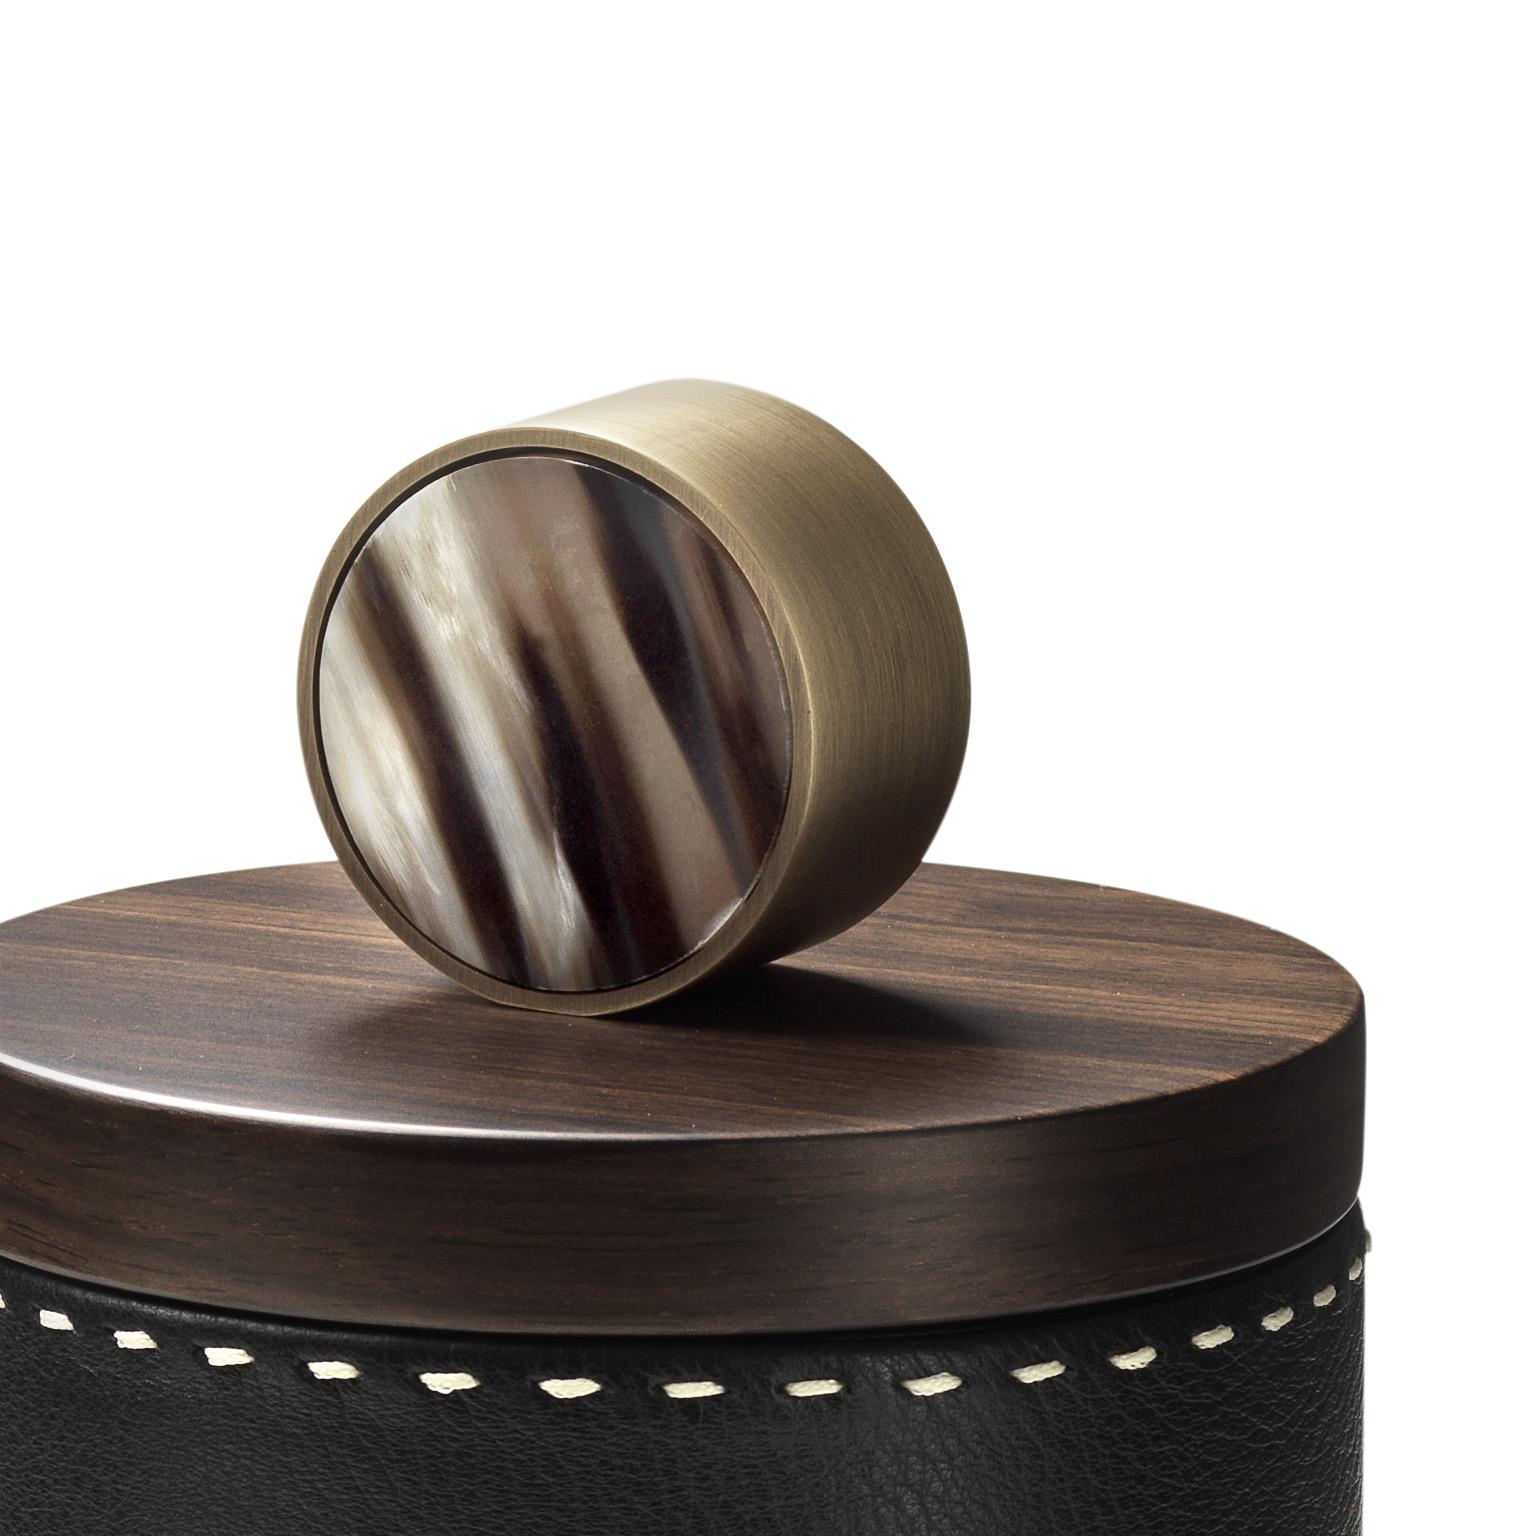 Hand-Crafted Agneta Round Box in Pebbled Leather with Handle in Corno Italiano, Mod. 4485 For Sale